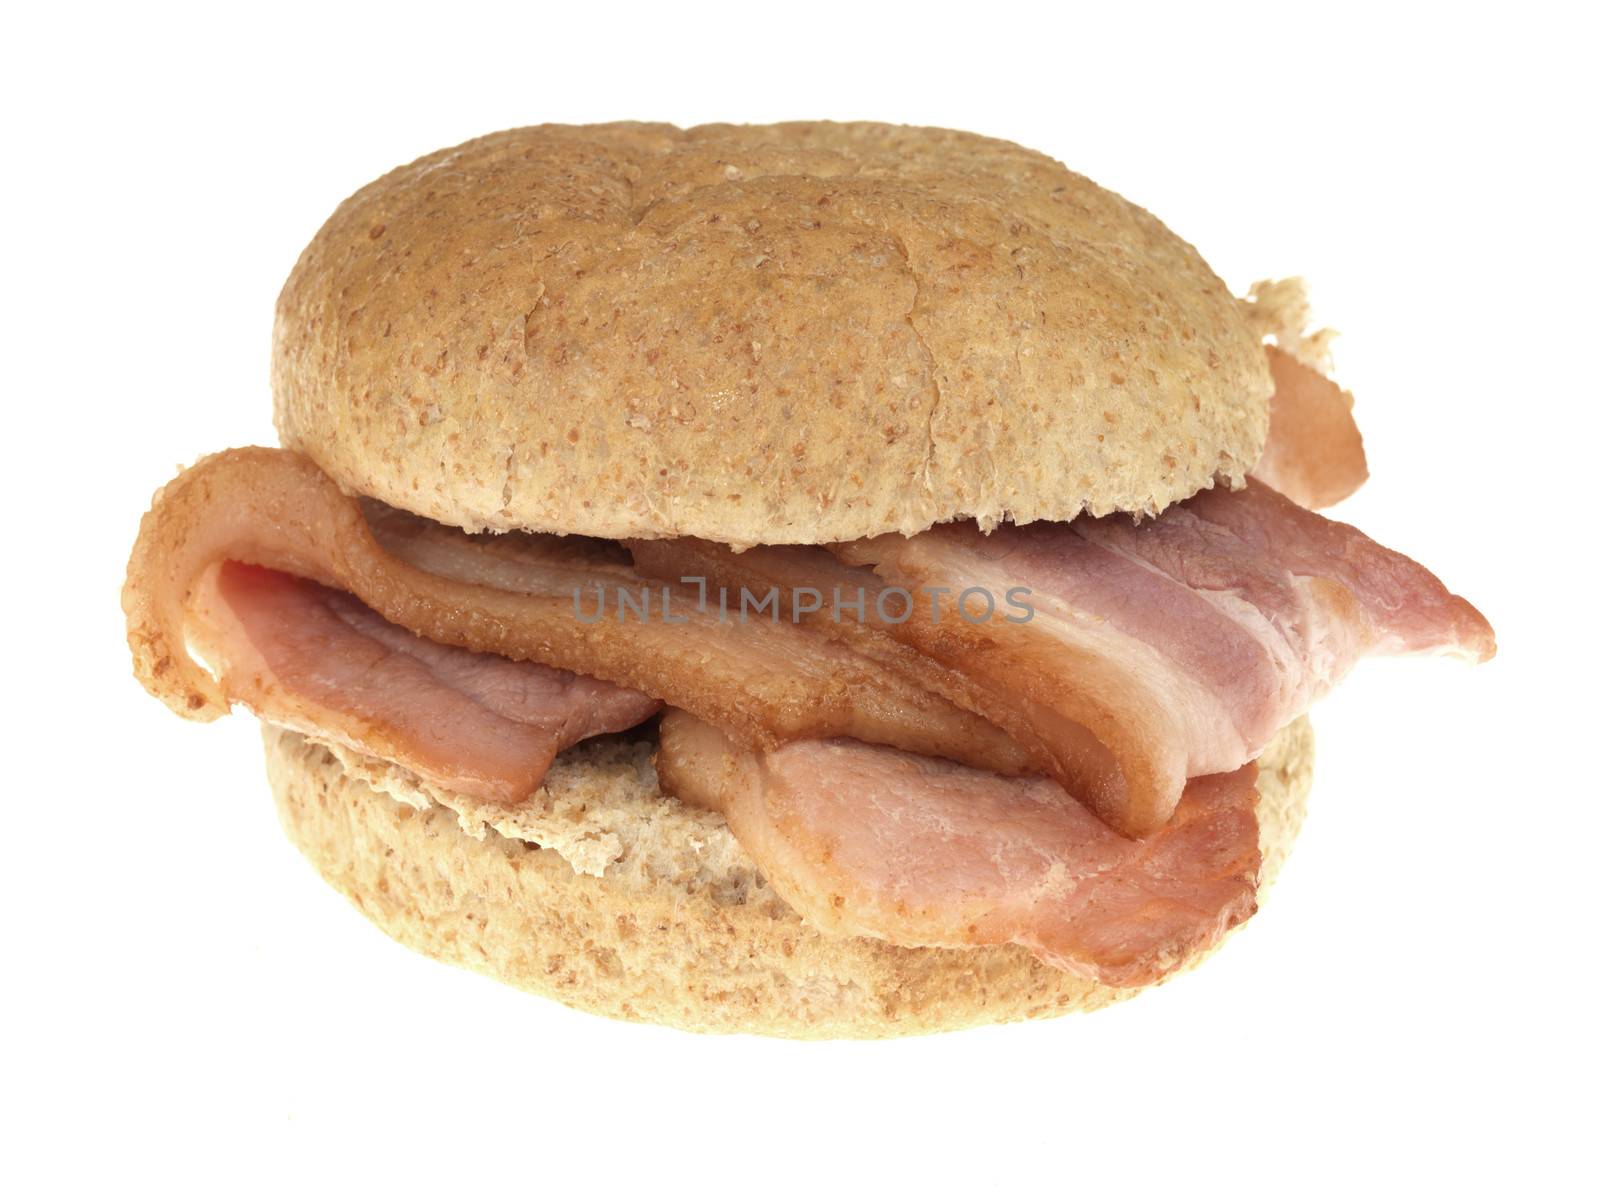 Bacon Roll by Whiteboxmedia